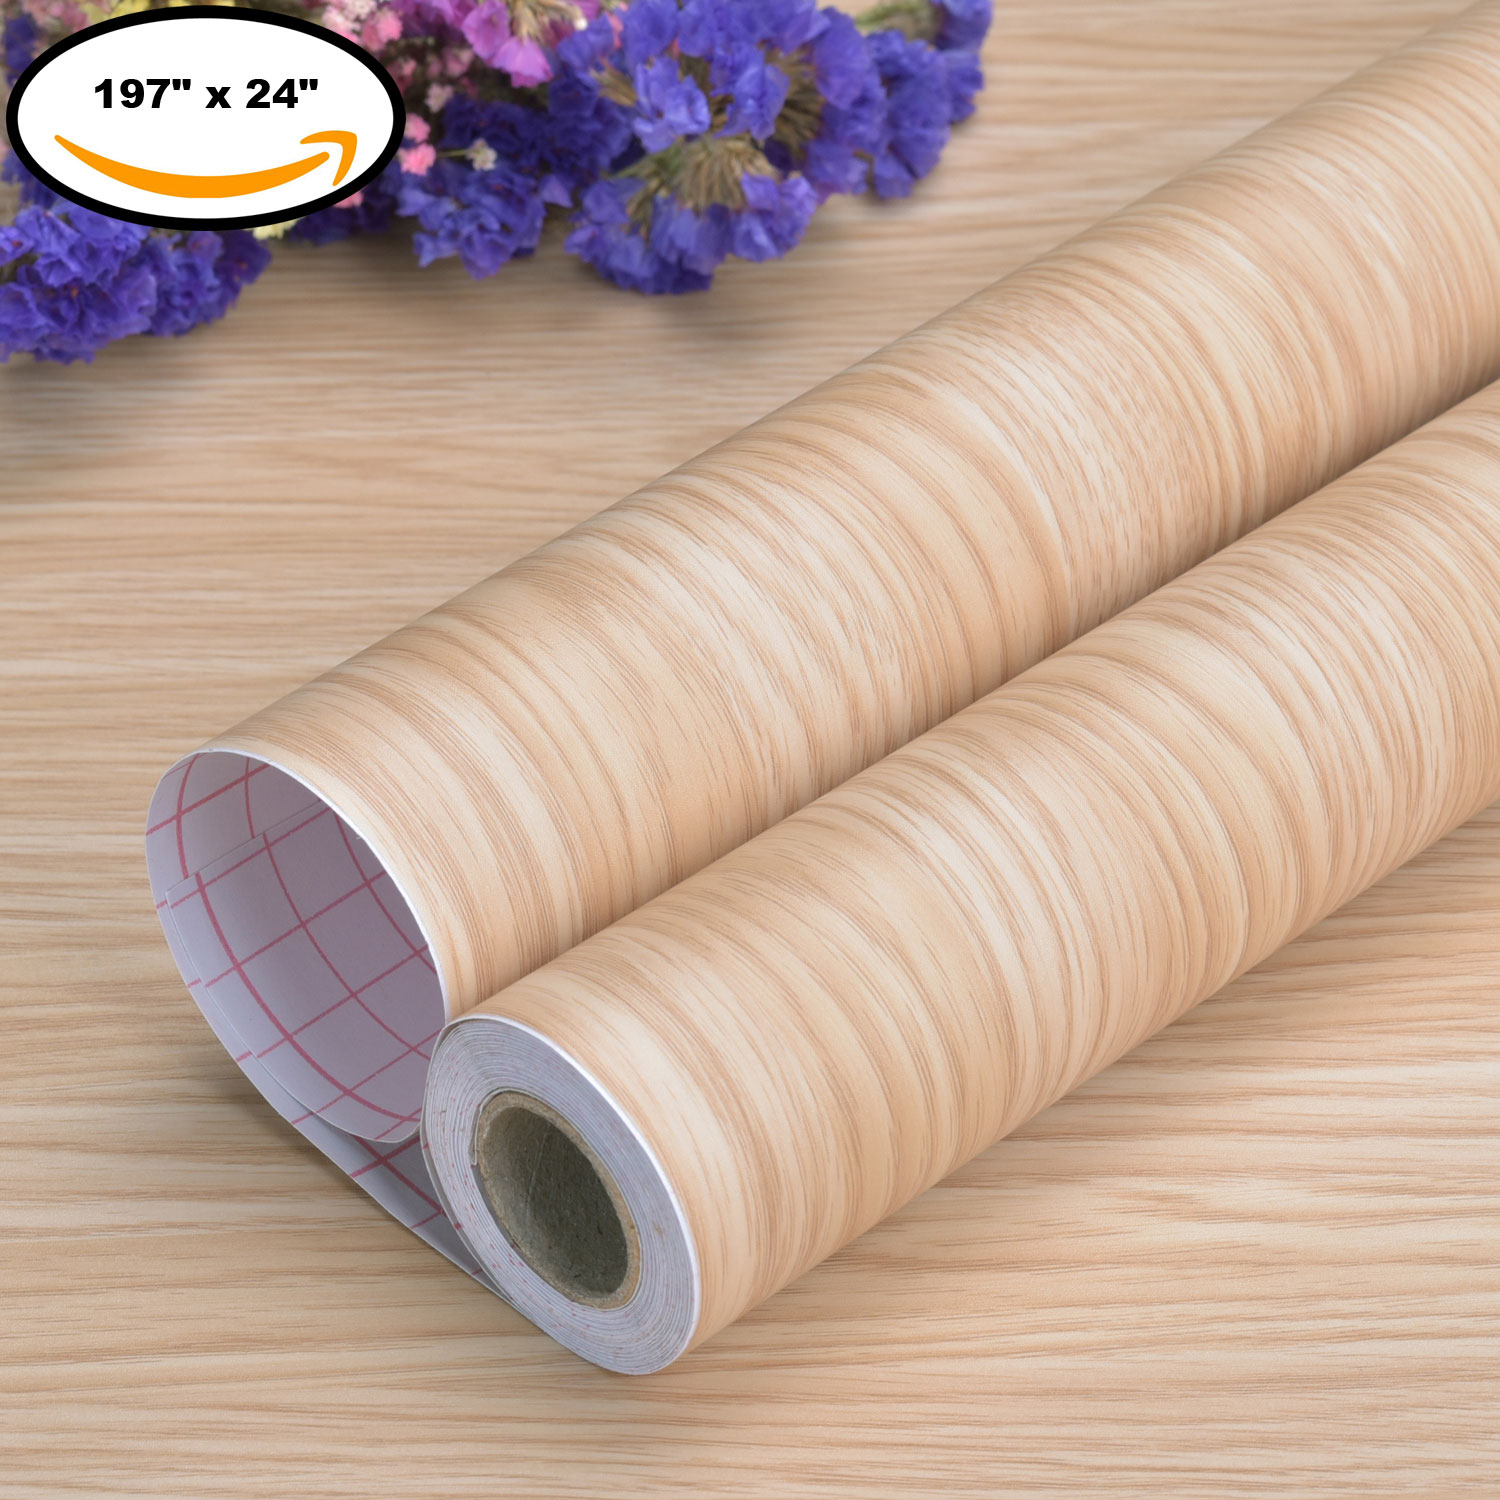 Art3d Peel and Stick Wallpaper Wood Wall Paper Self-Adhesive Contact Paper  197